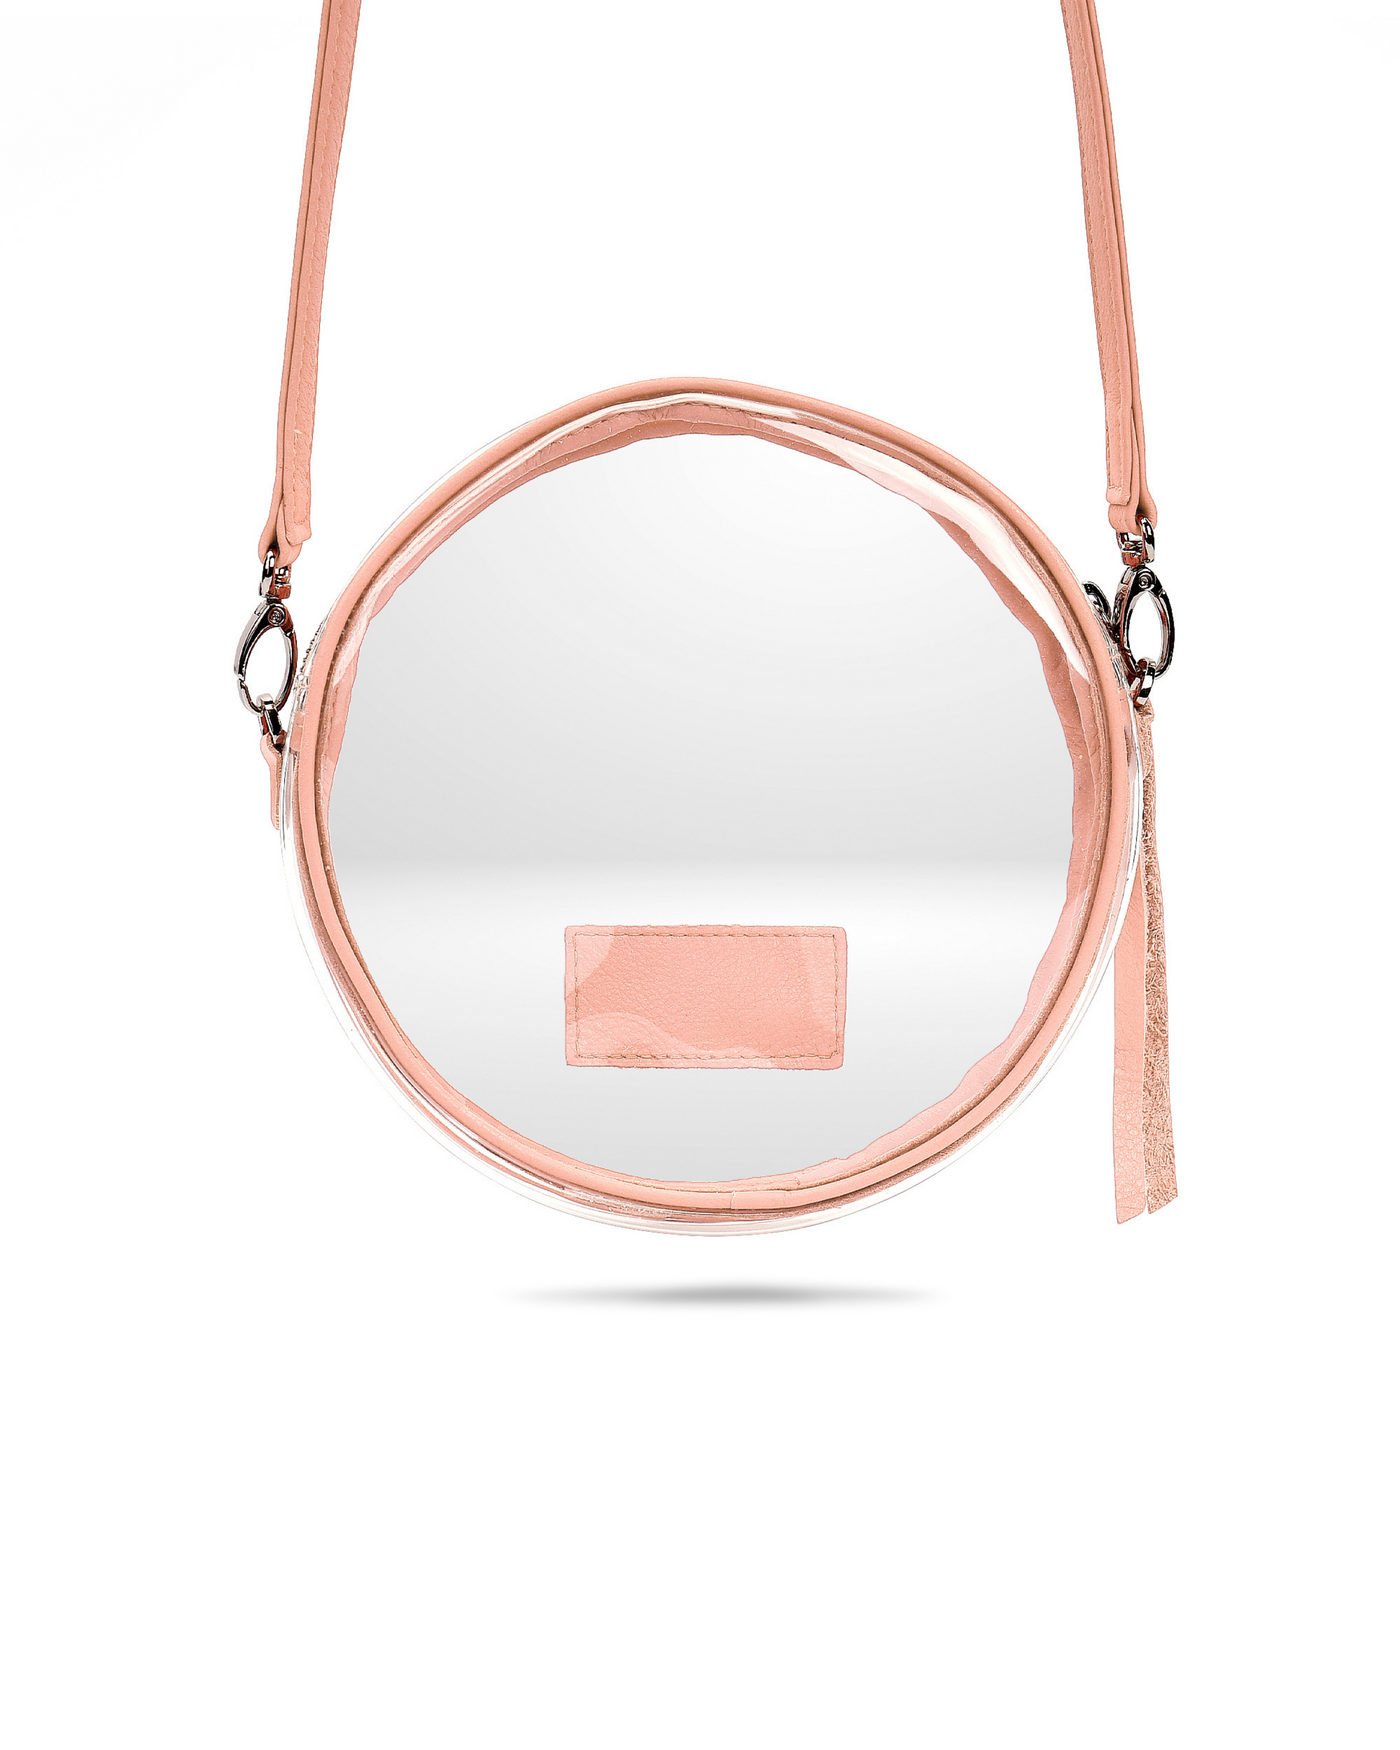 Isabelle Clear Circle Bag - Buffed Pink Isabelle Clear Bag Joey James, The Label   